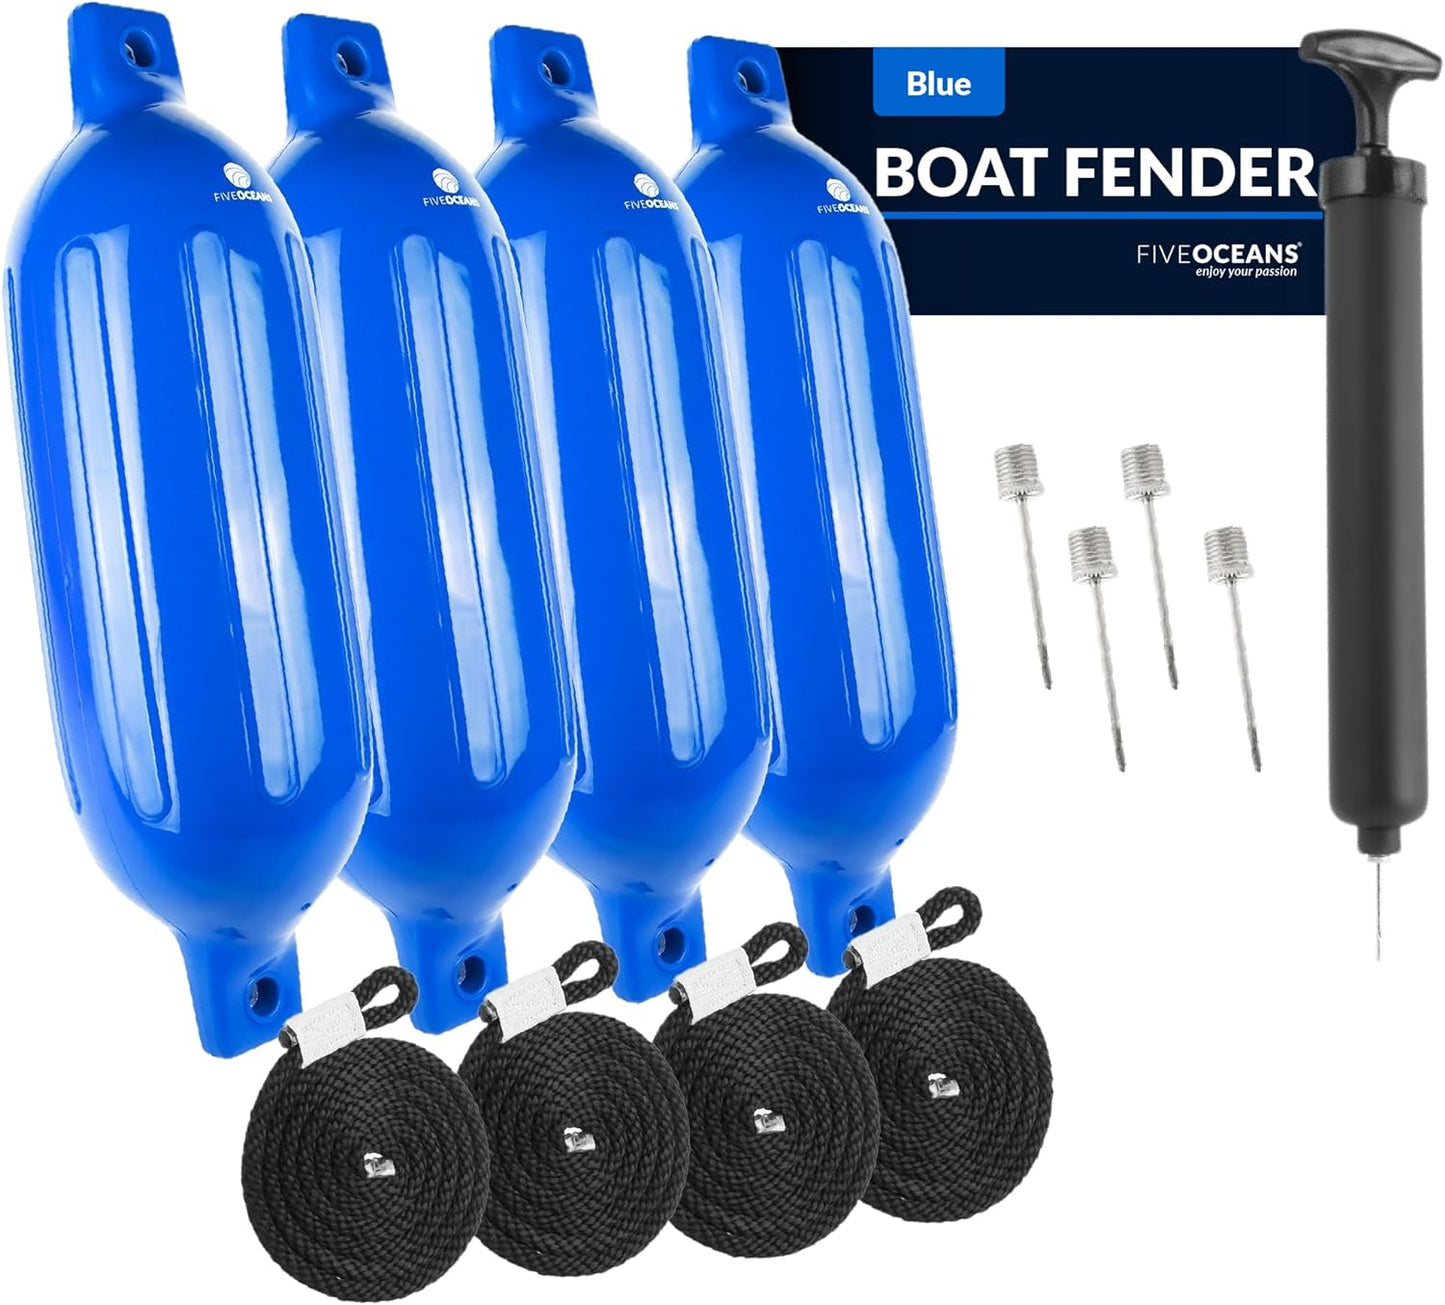 4-Pack Boat Fenders - Boat Bumpers for Docking - 4 Ropes Lines 3/8-Inch X 5-Foot - Boat Fender with Inflator Pump and 4 Needles for Pontoon Fishing Boats Bass Boats Sport Boats Sailboats